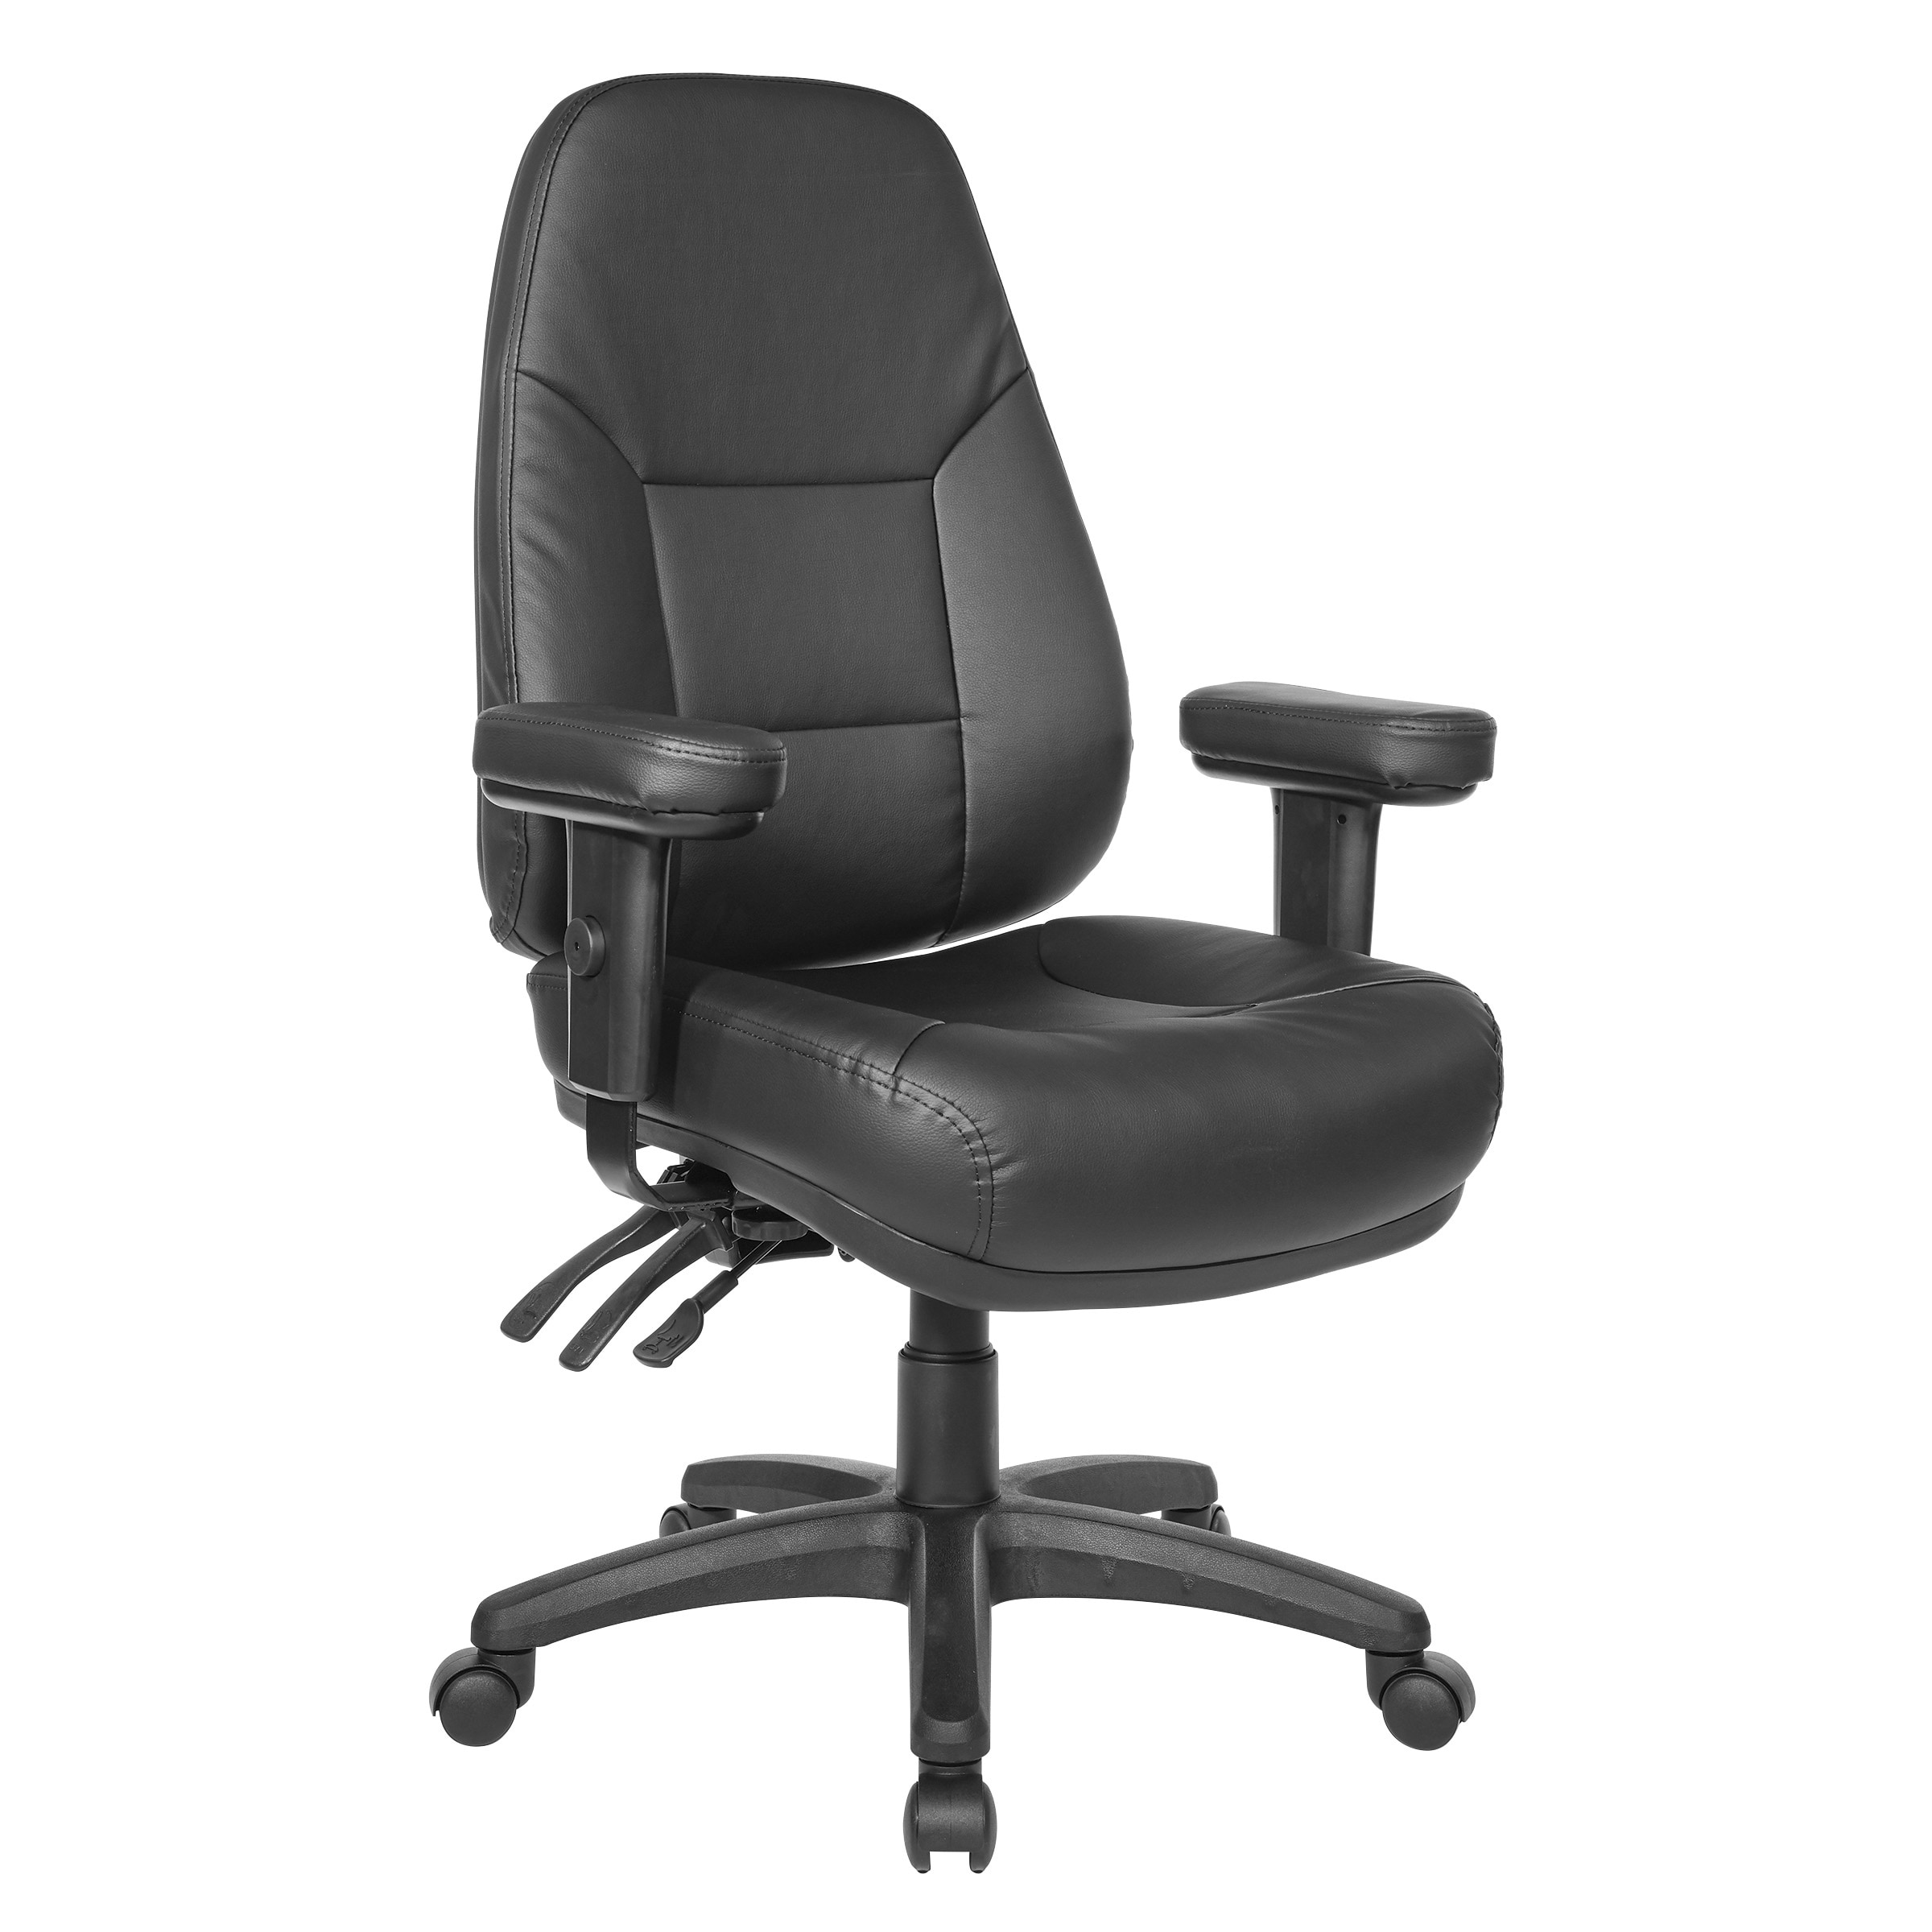 https://ak1.ostkcdn.com/images/products/is/images/direct/ff78a44d23d99a26bd4de3c1a8452cf5c4ee4613/Office-Star-Work-Smart-Professional-Dual-Function-Ergonomic-High-Back-Chair.jpg